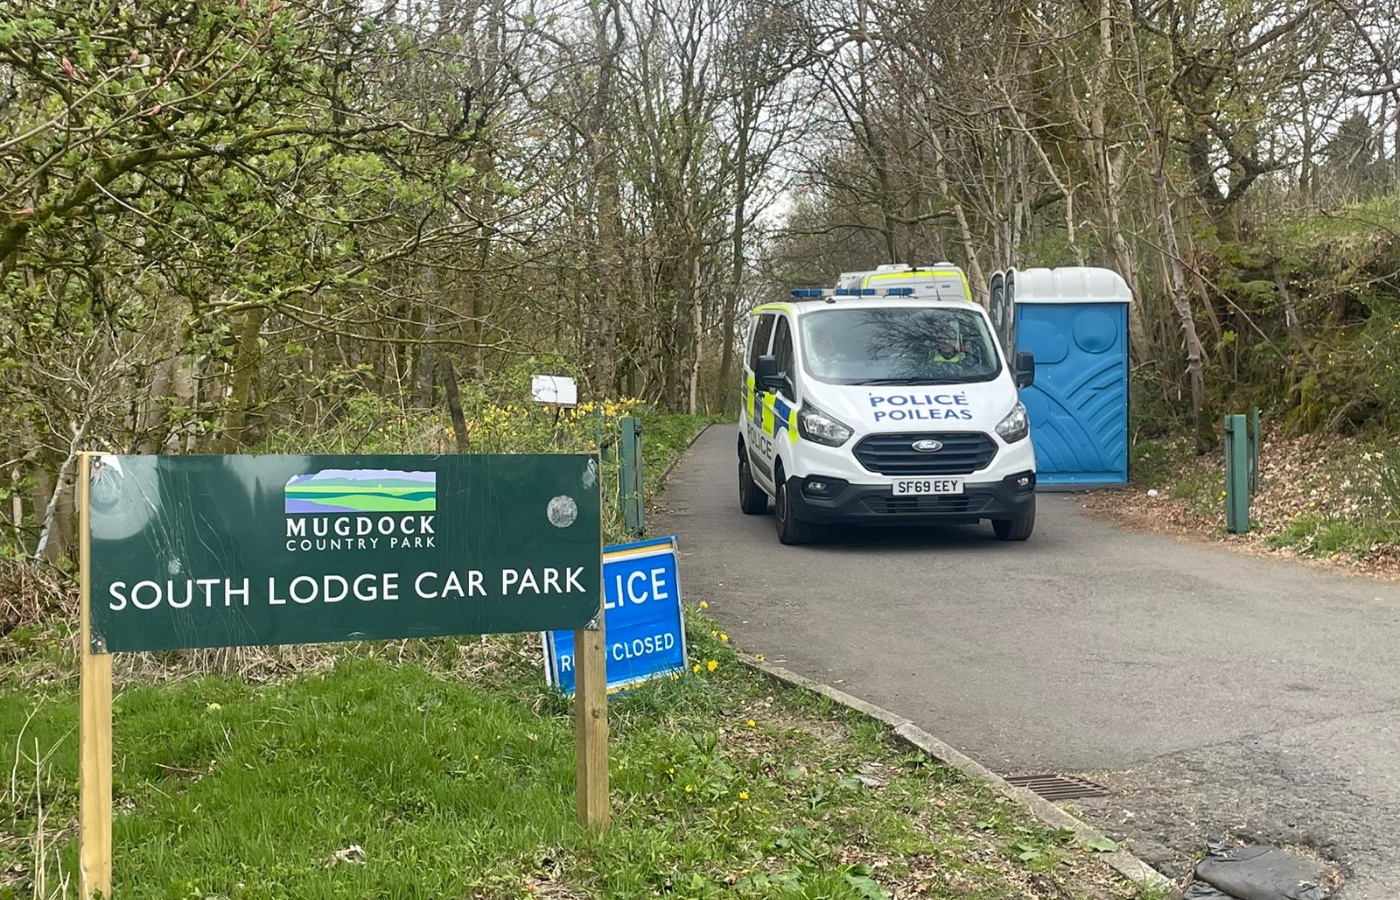 A hunt for a missing person at Mugdock Country Park is being linked to the death.